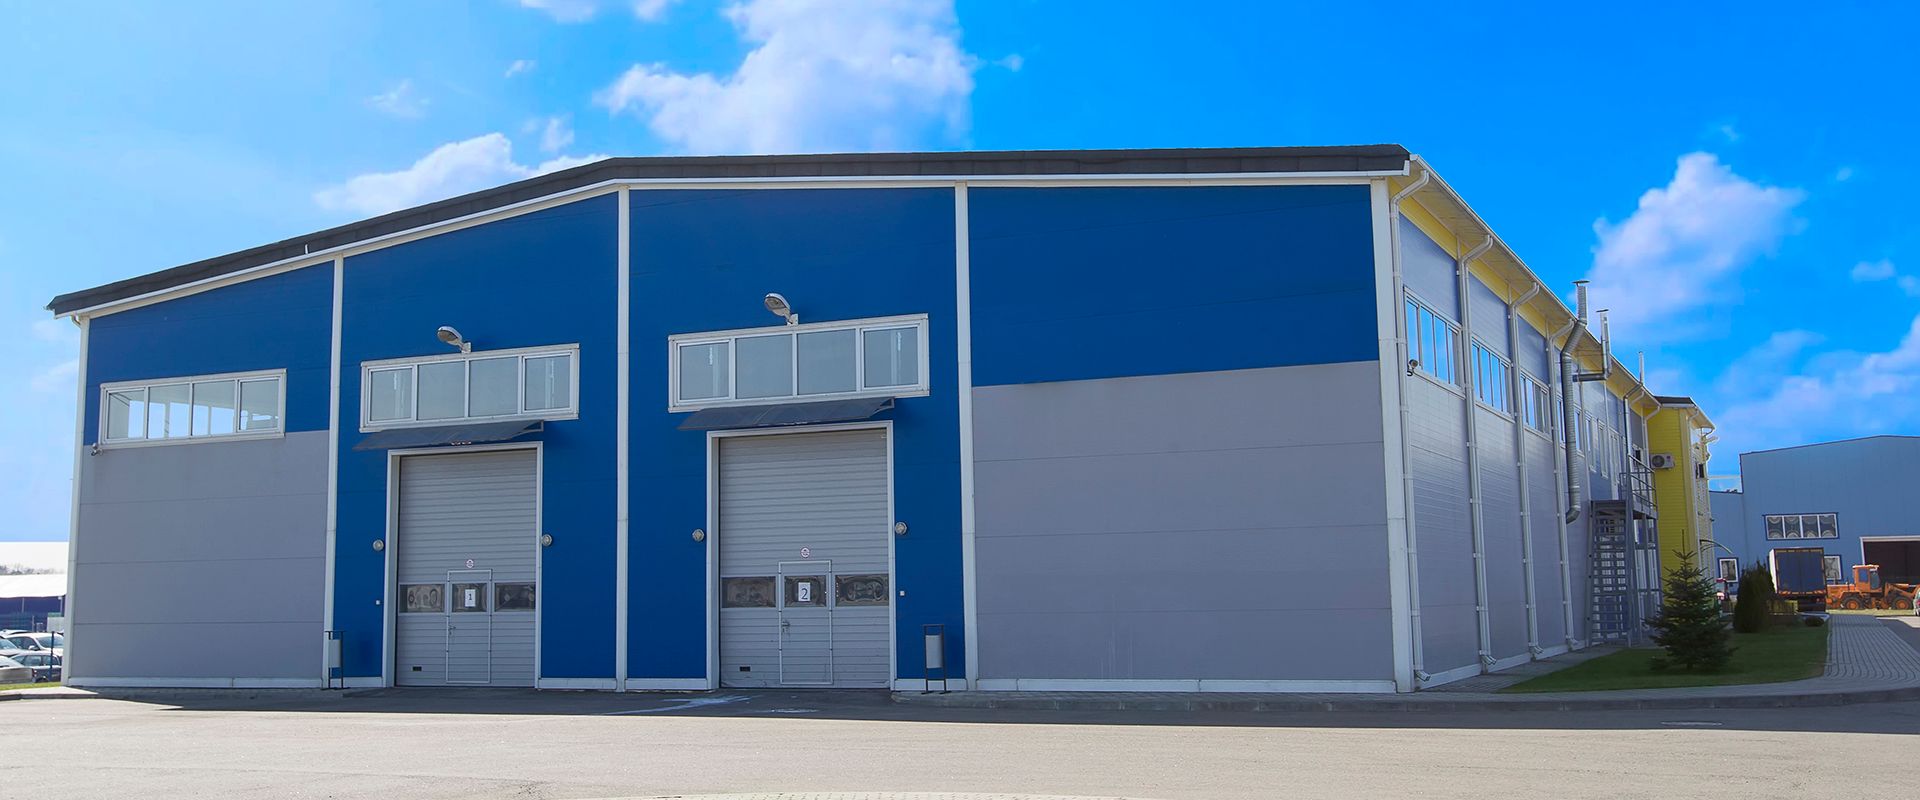 Pre-engineered steel buildings are an impressive billboard for your company's brand.